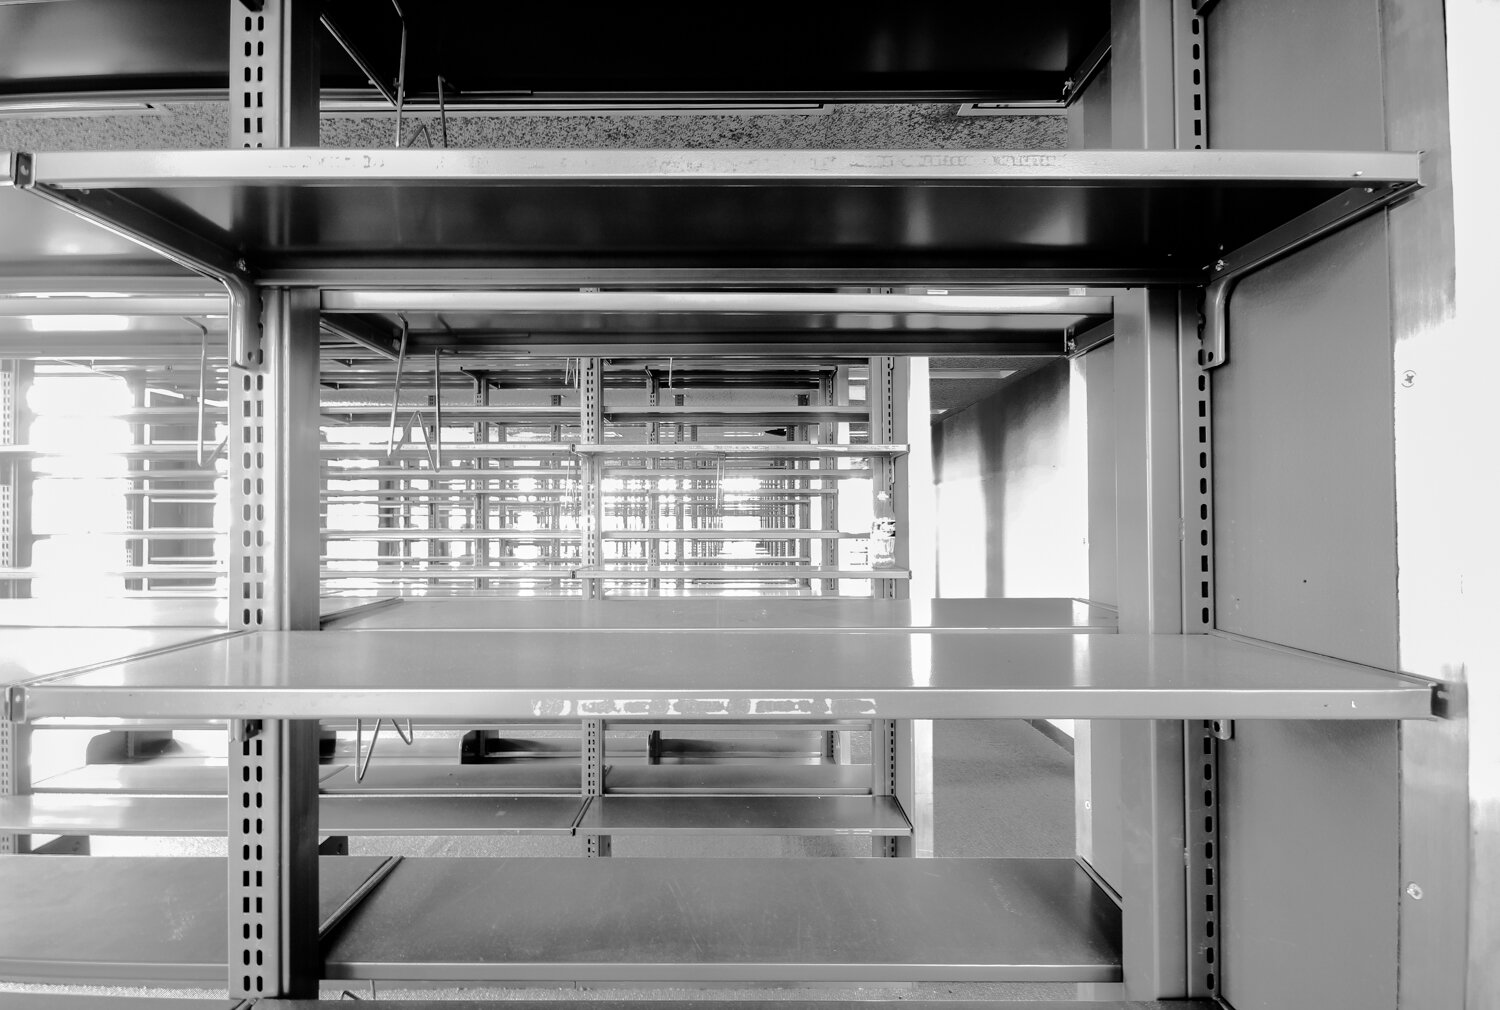  Bookcases in what once was the Schwab Library in the main tower 